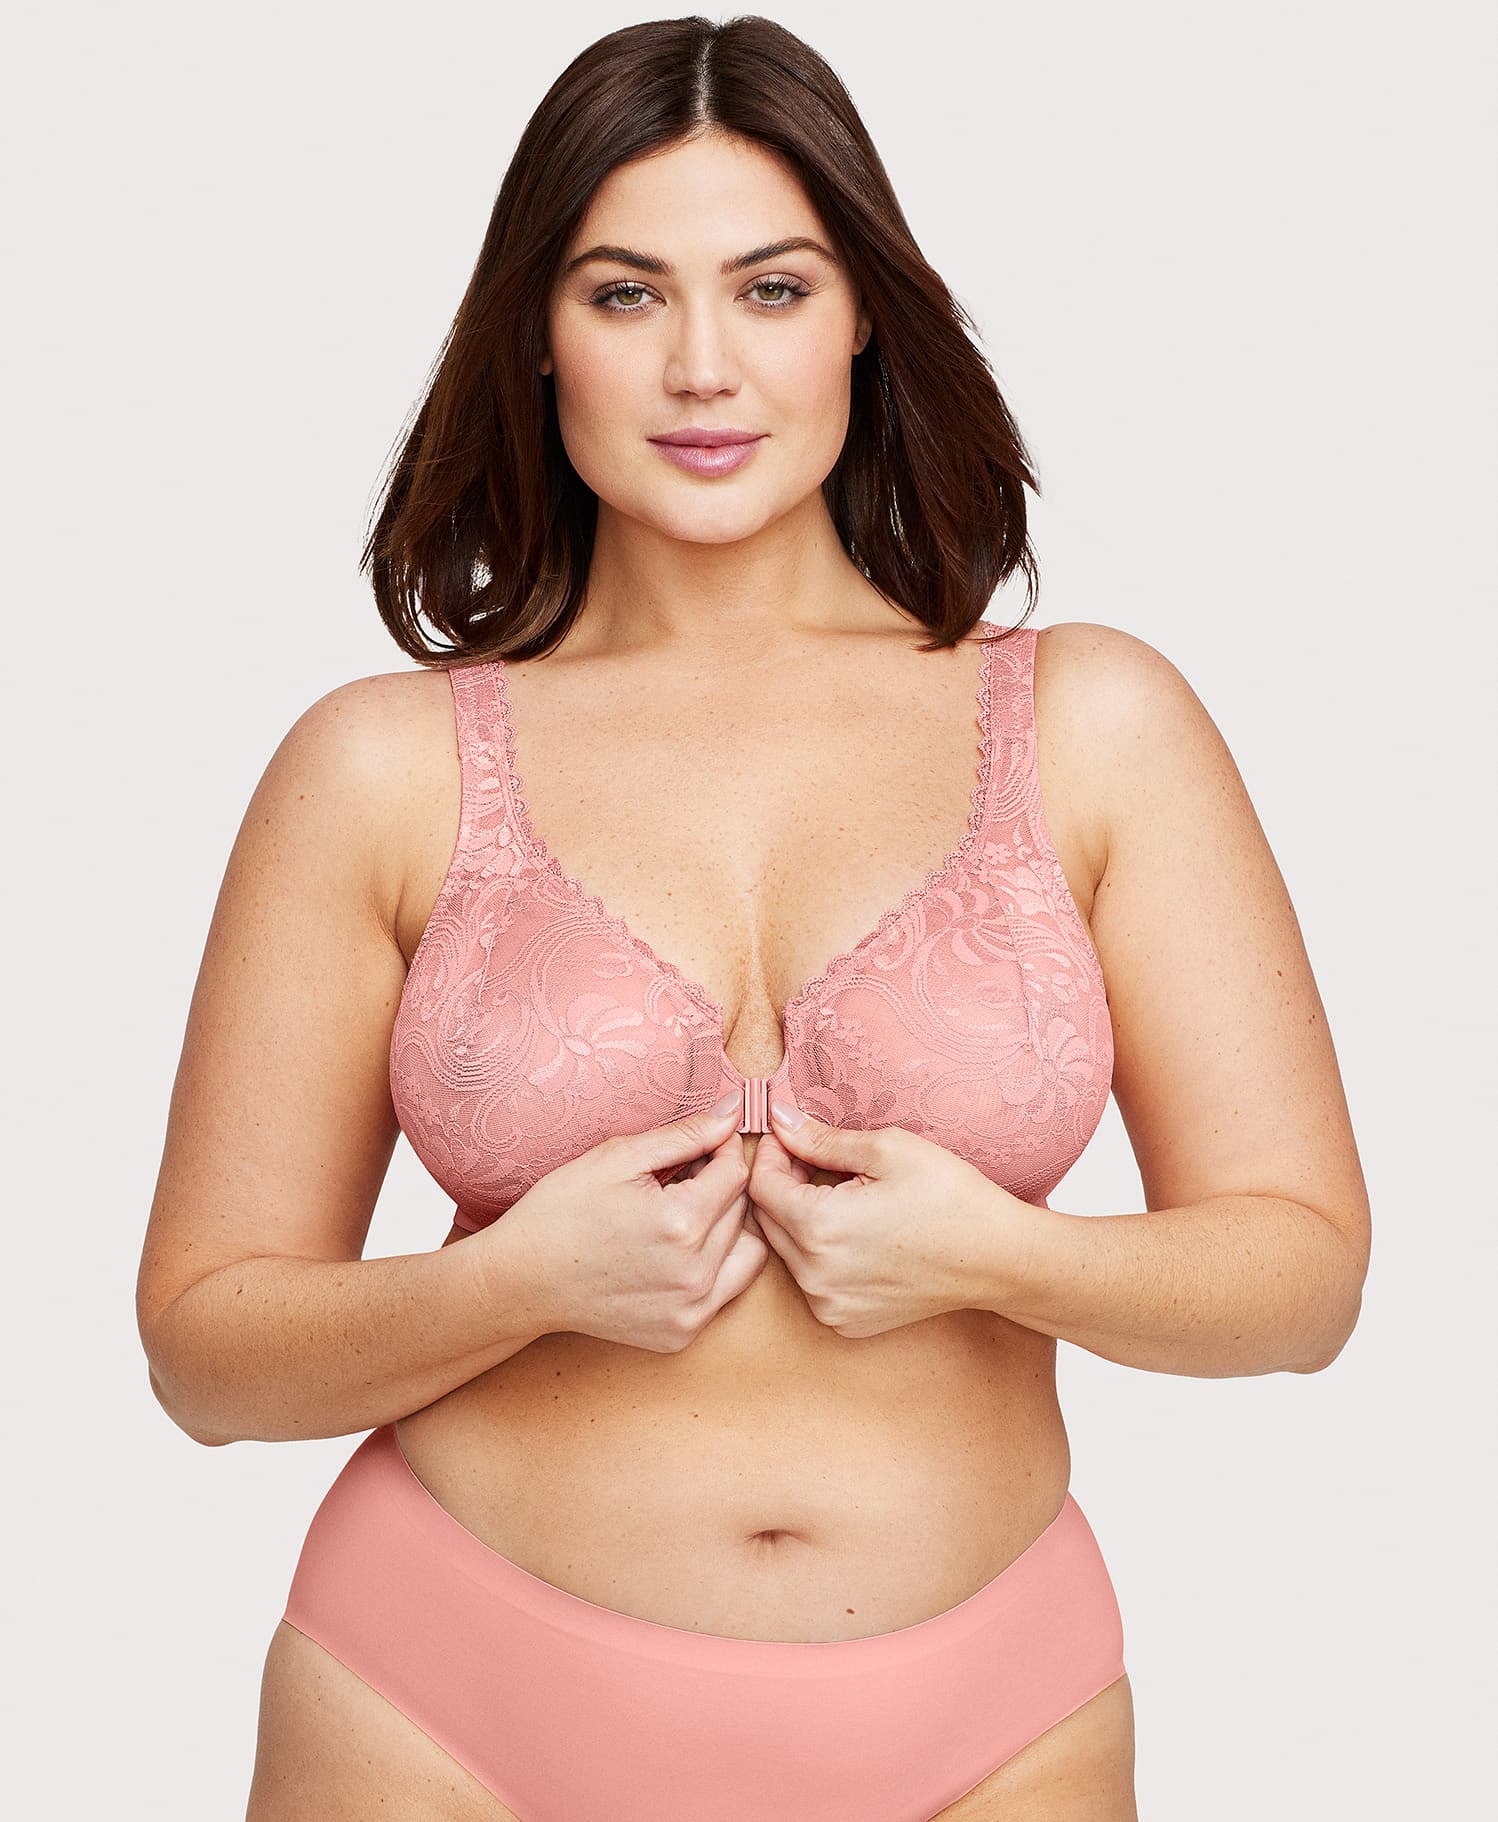 Lace Bras, Stretch Lace Bras for Big Boobs